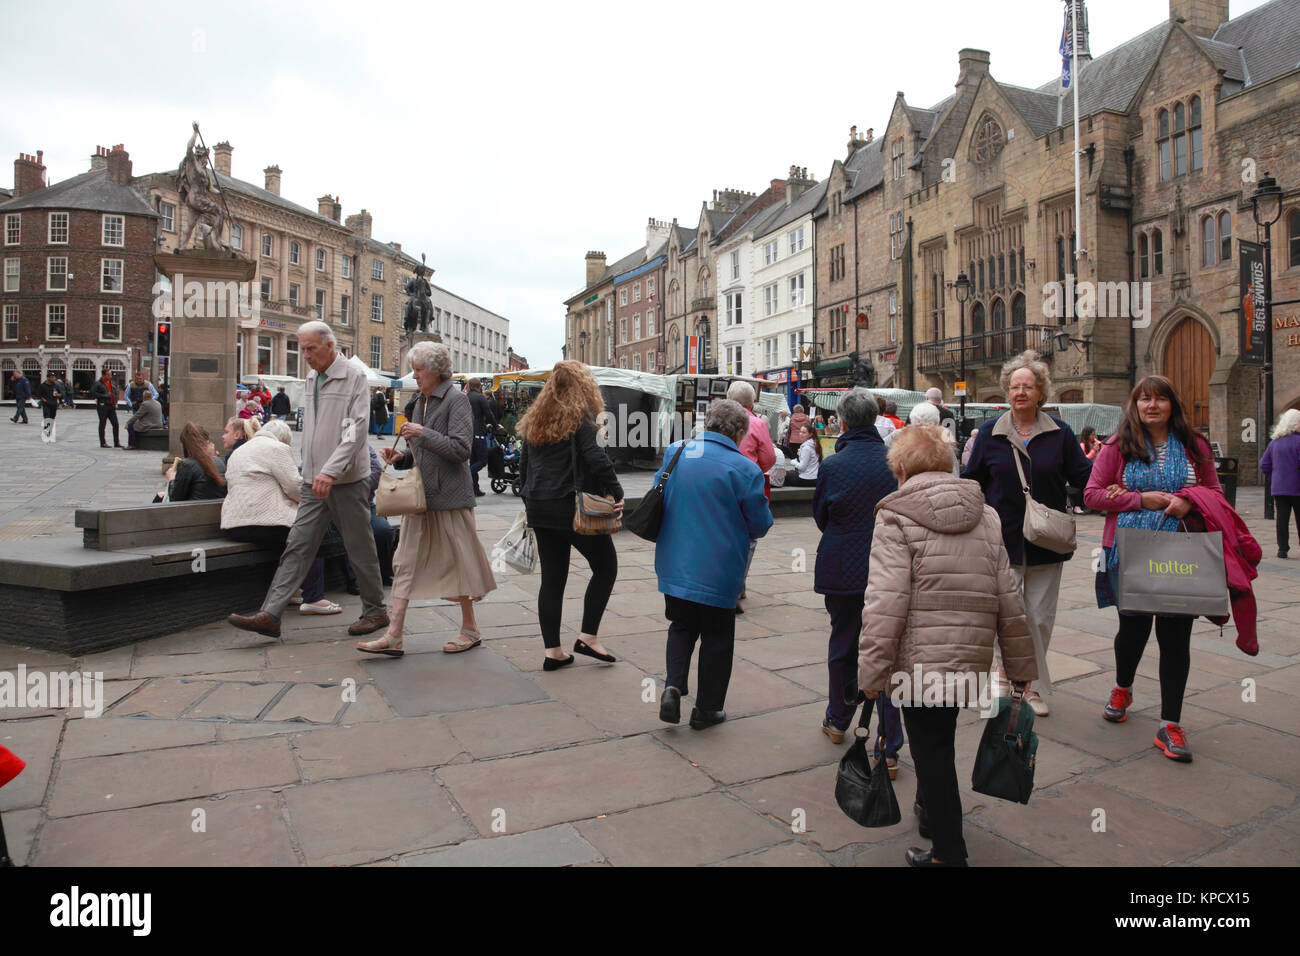 The outdoor Saturday market in Market Place, Durham, busy with shoppers Stock Photo